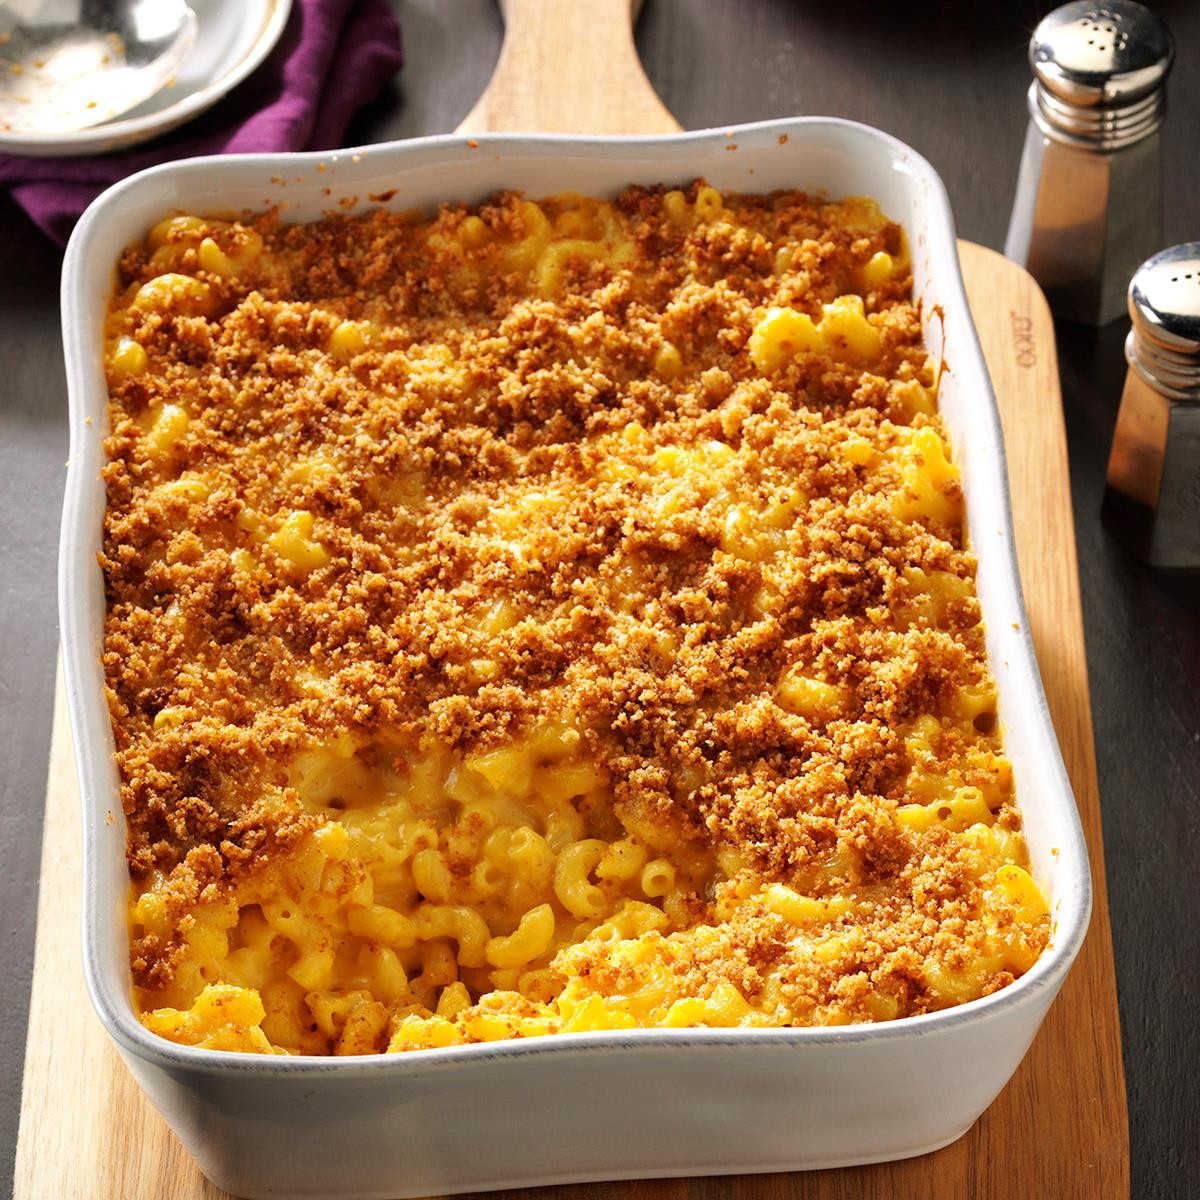 Making Baked Macaroni And Cheese
 Baked Mac and Cheese Recipe